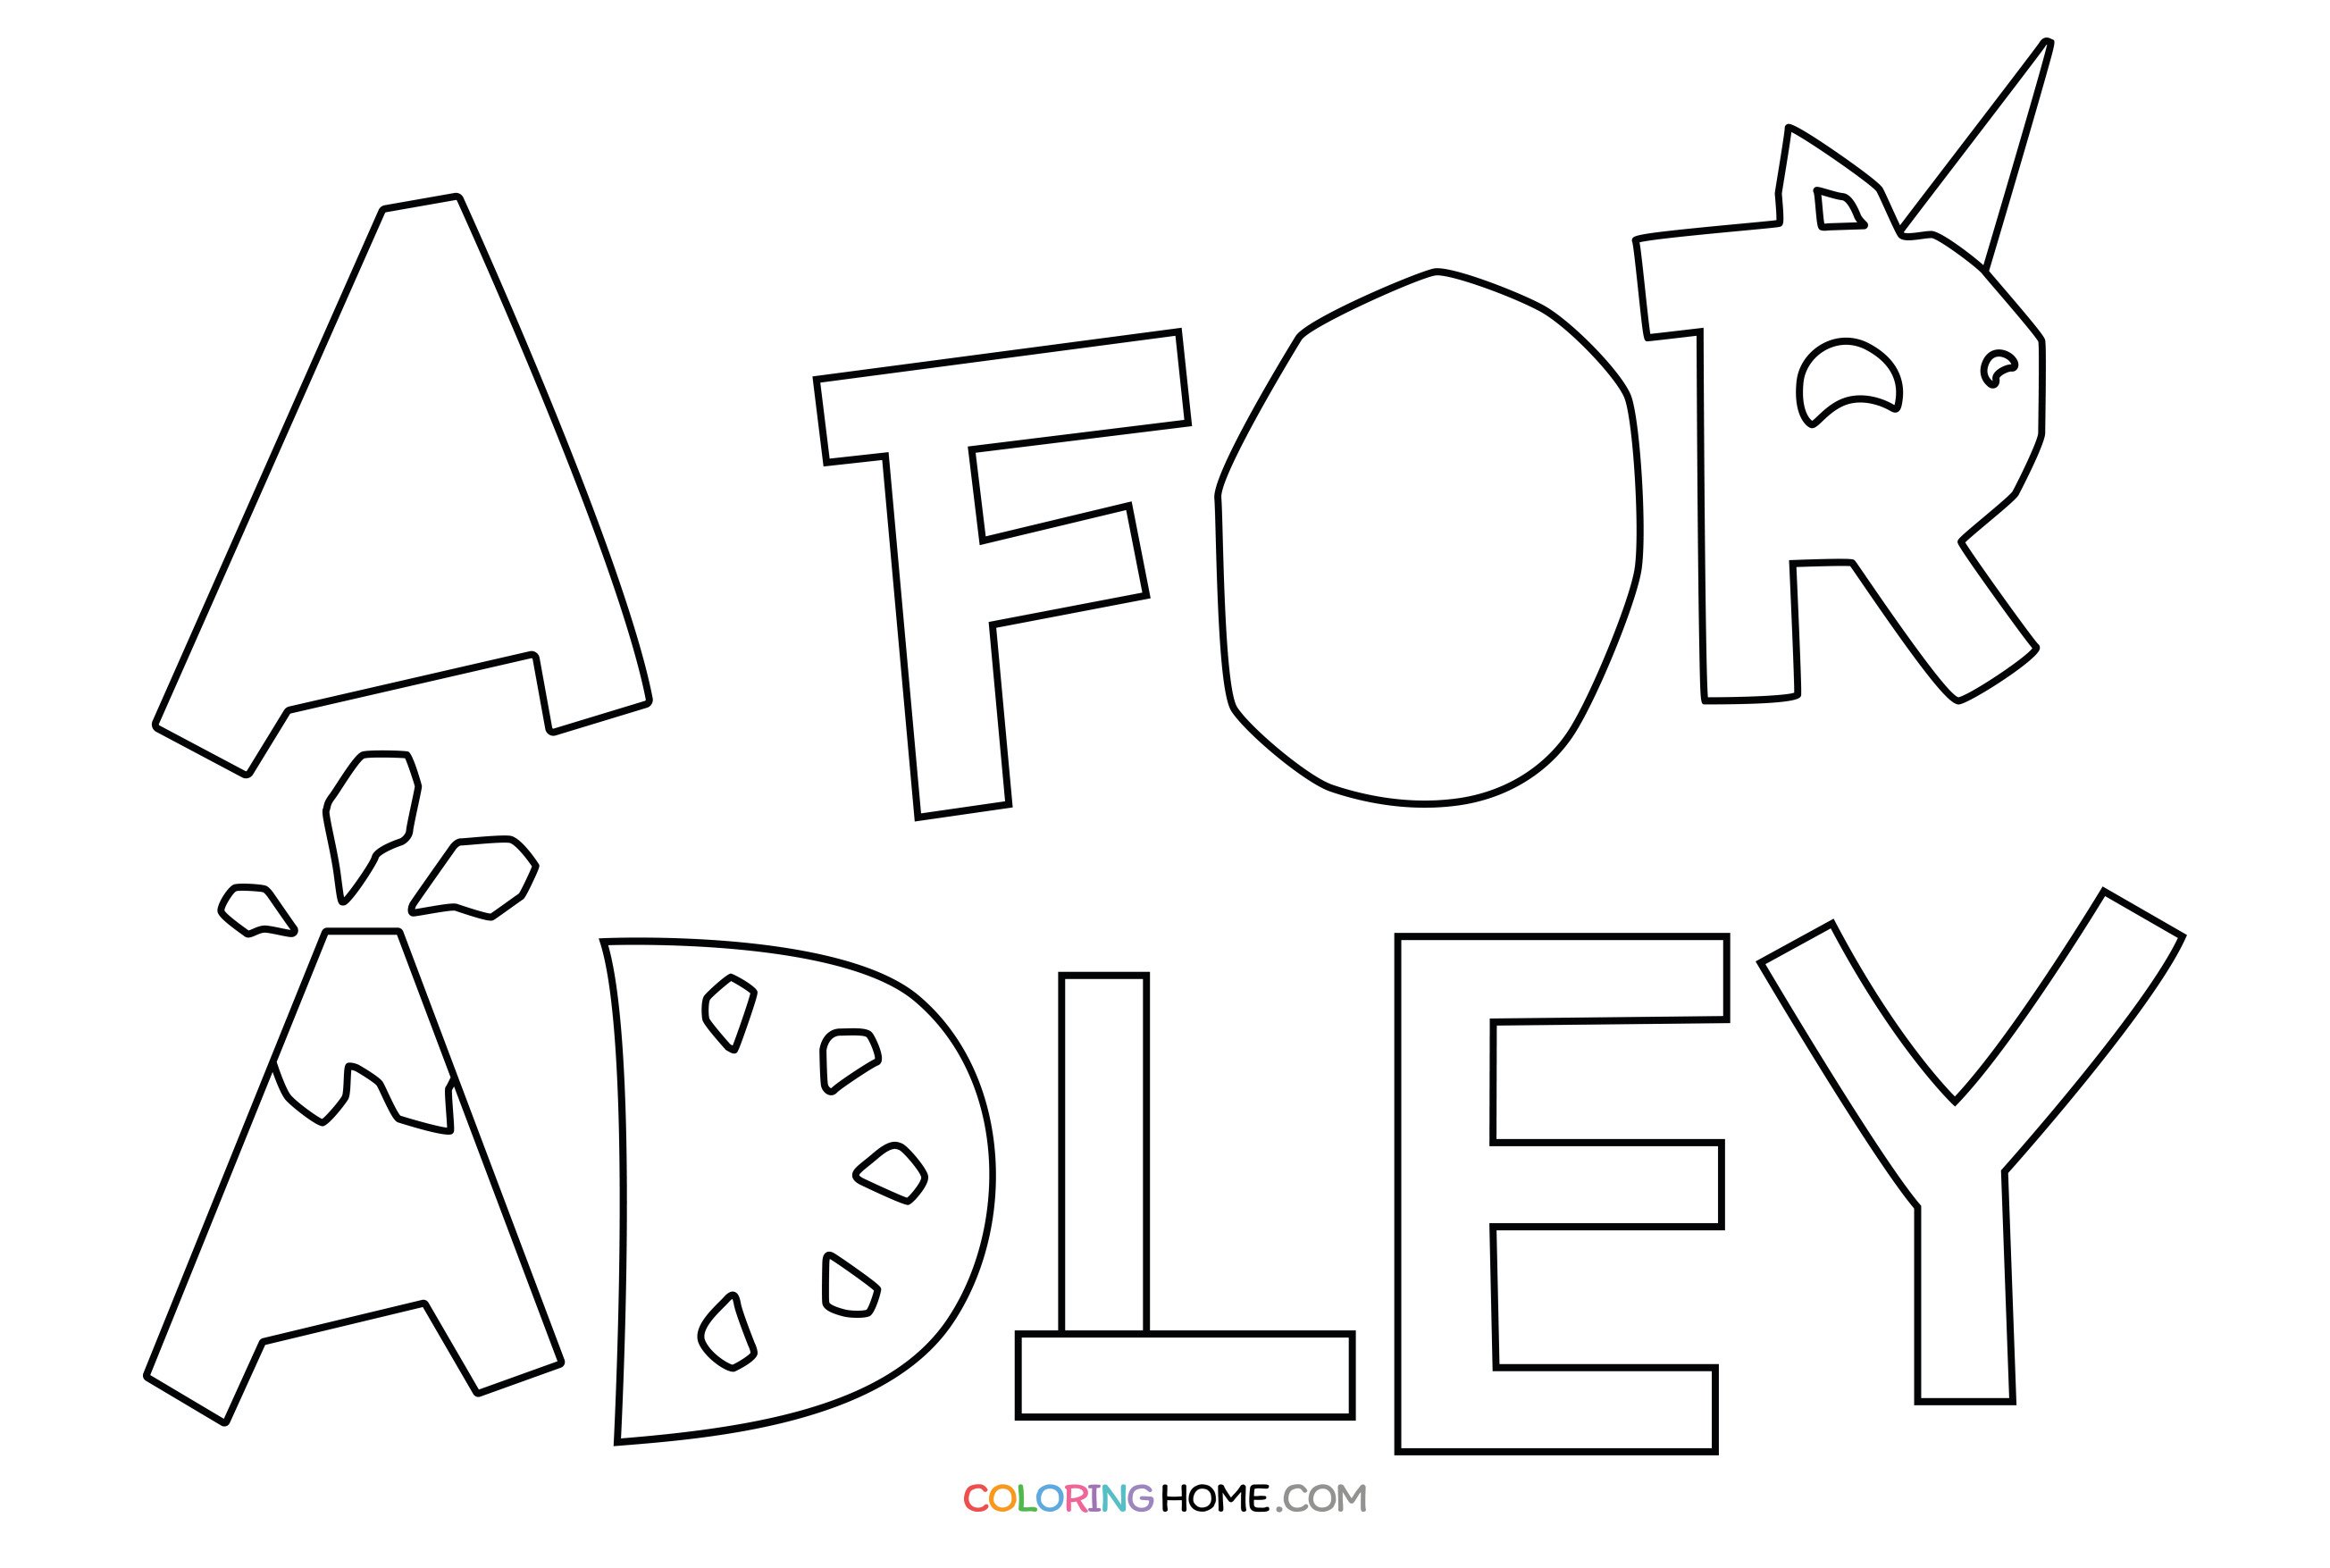 A for Adley coloring page